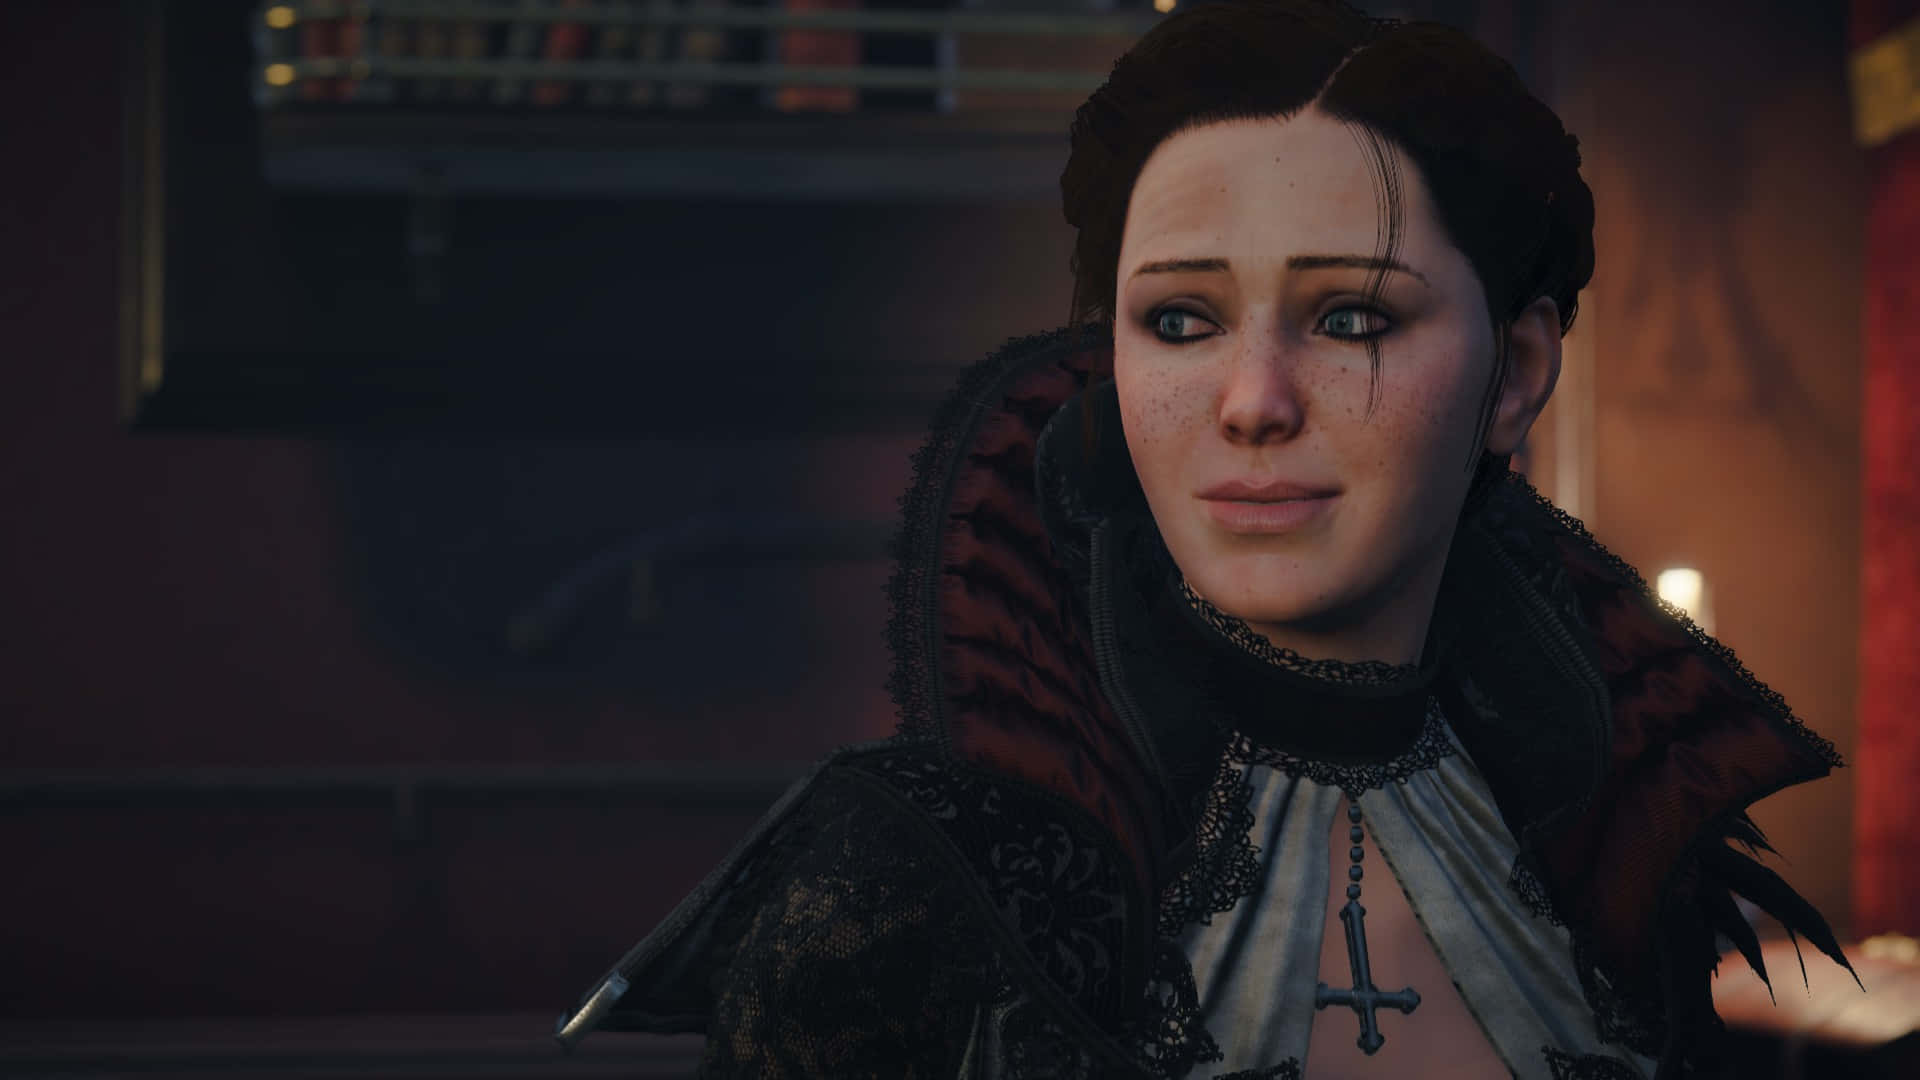 Evie Frye: The Skilled Assassin of Victorian London Wallpaper